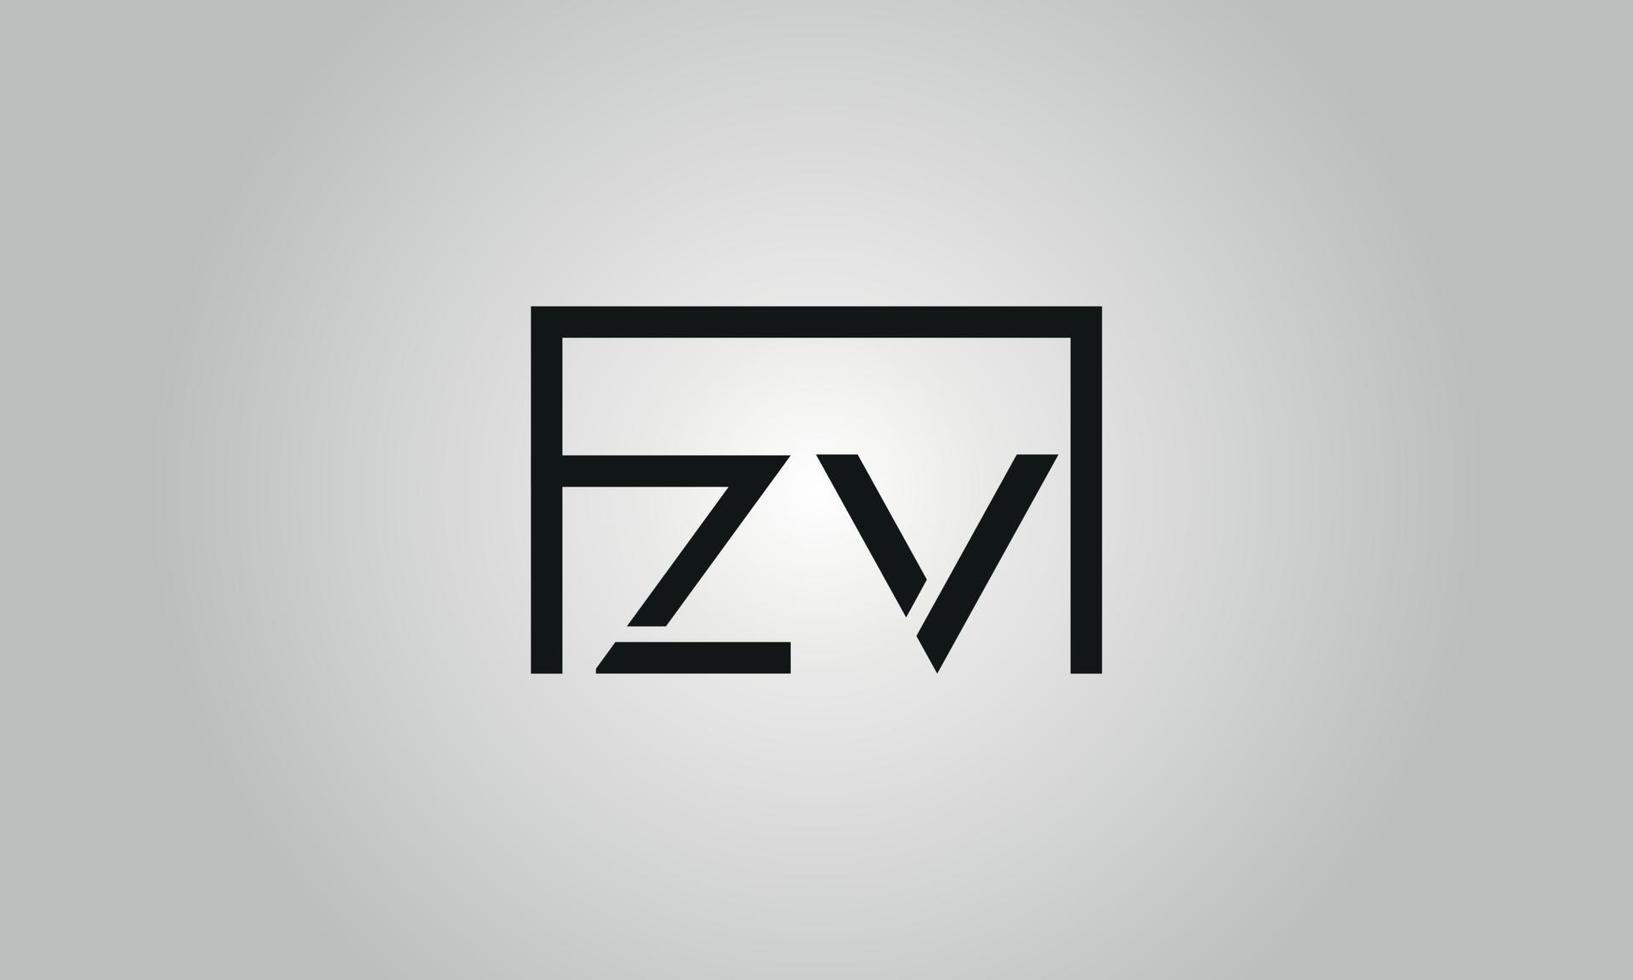 Letter ZV logo design. ZV logo with square shape in black colors vector free vector template.